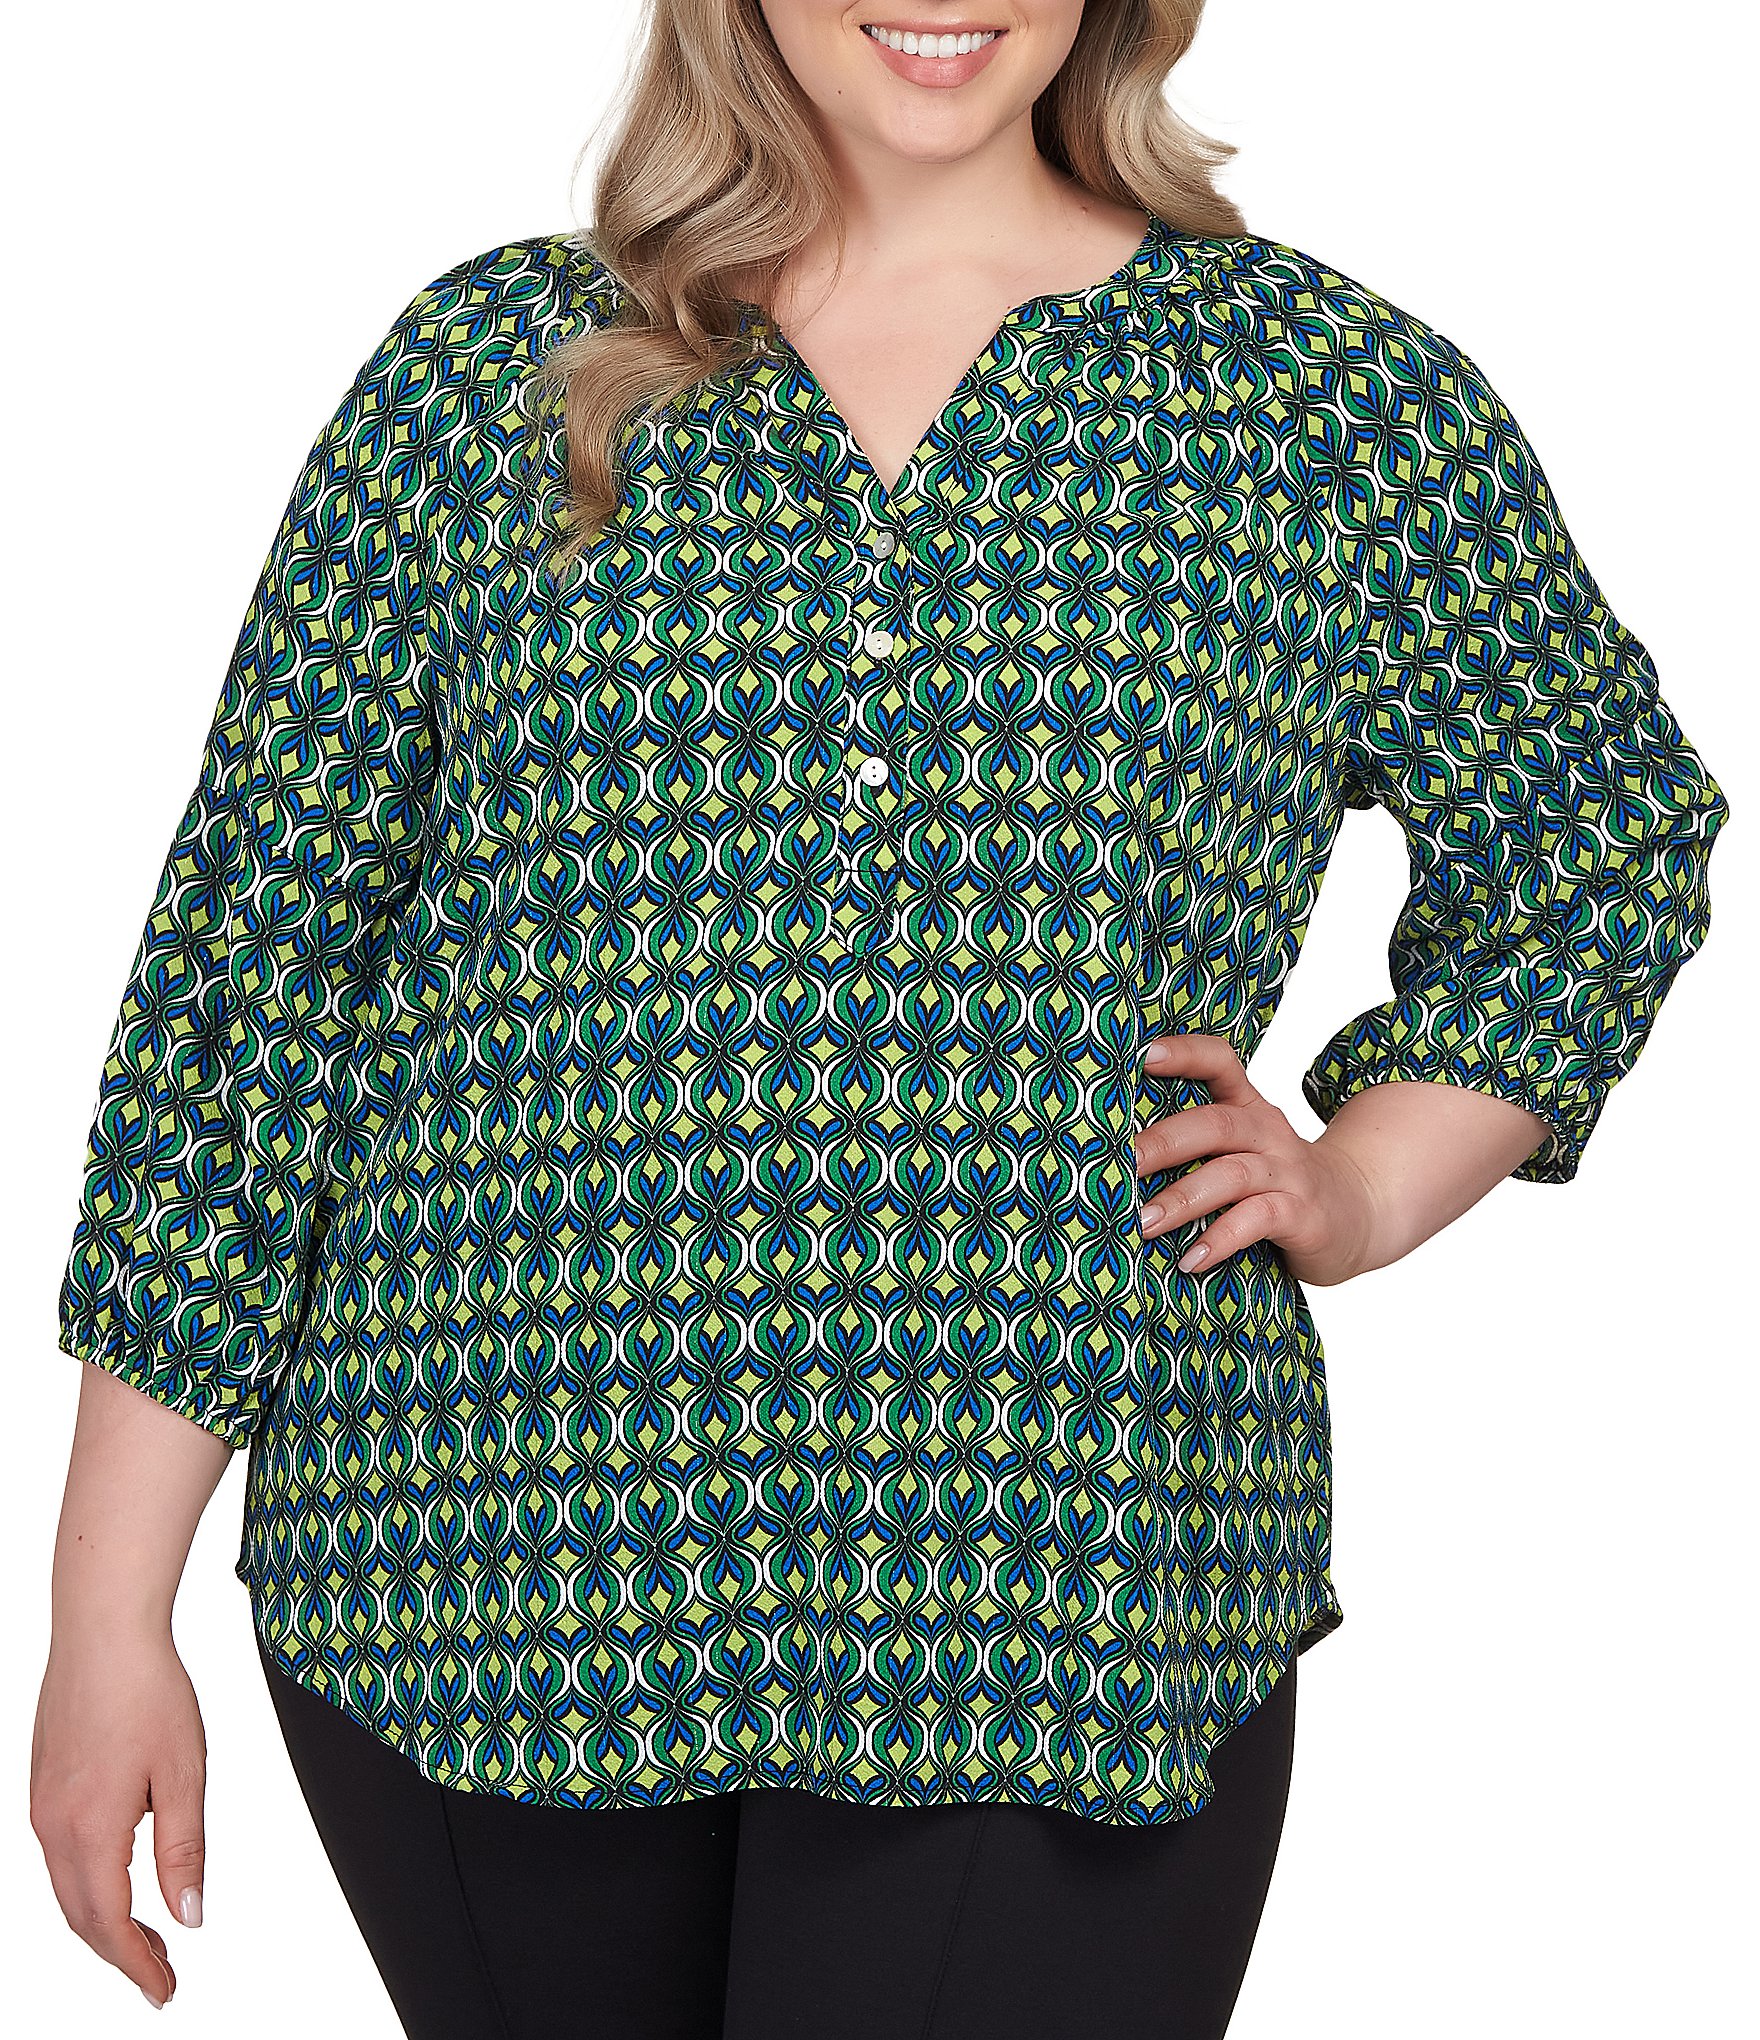 RUBY RD Boho Top 2X Plus Size Blouse Olive Green Coral Print